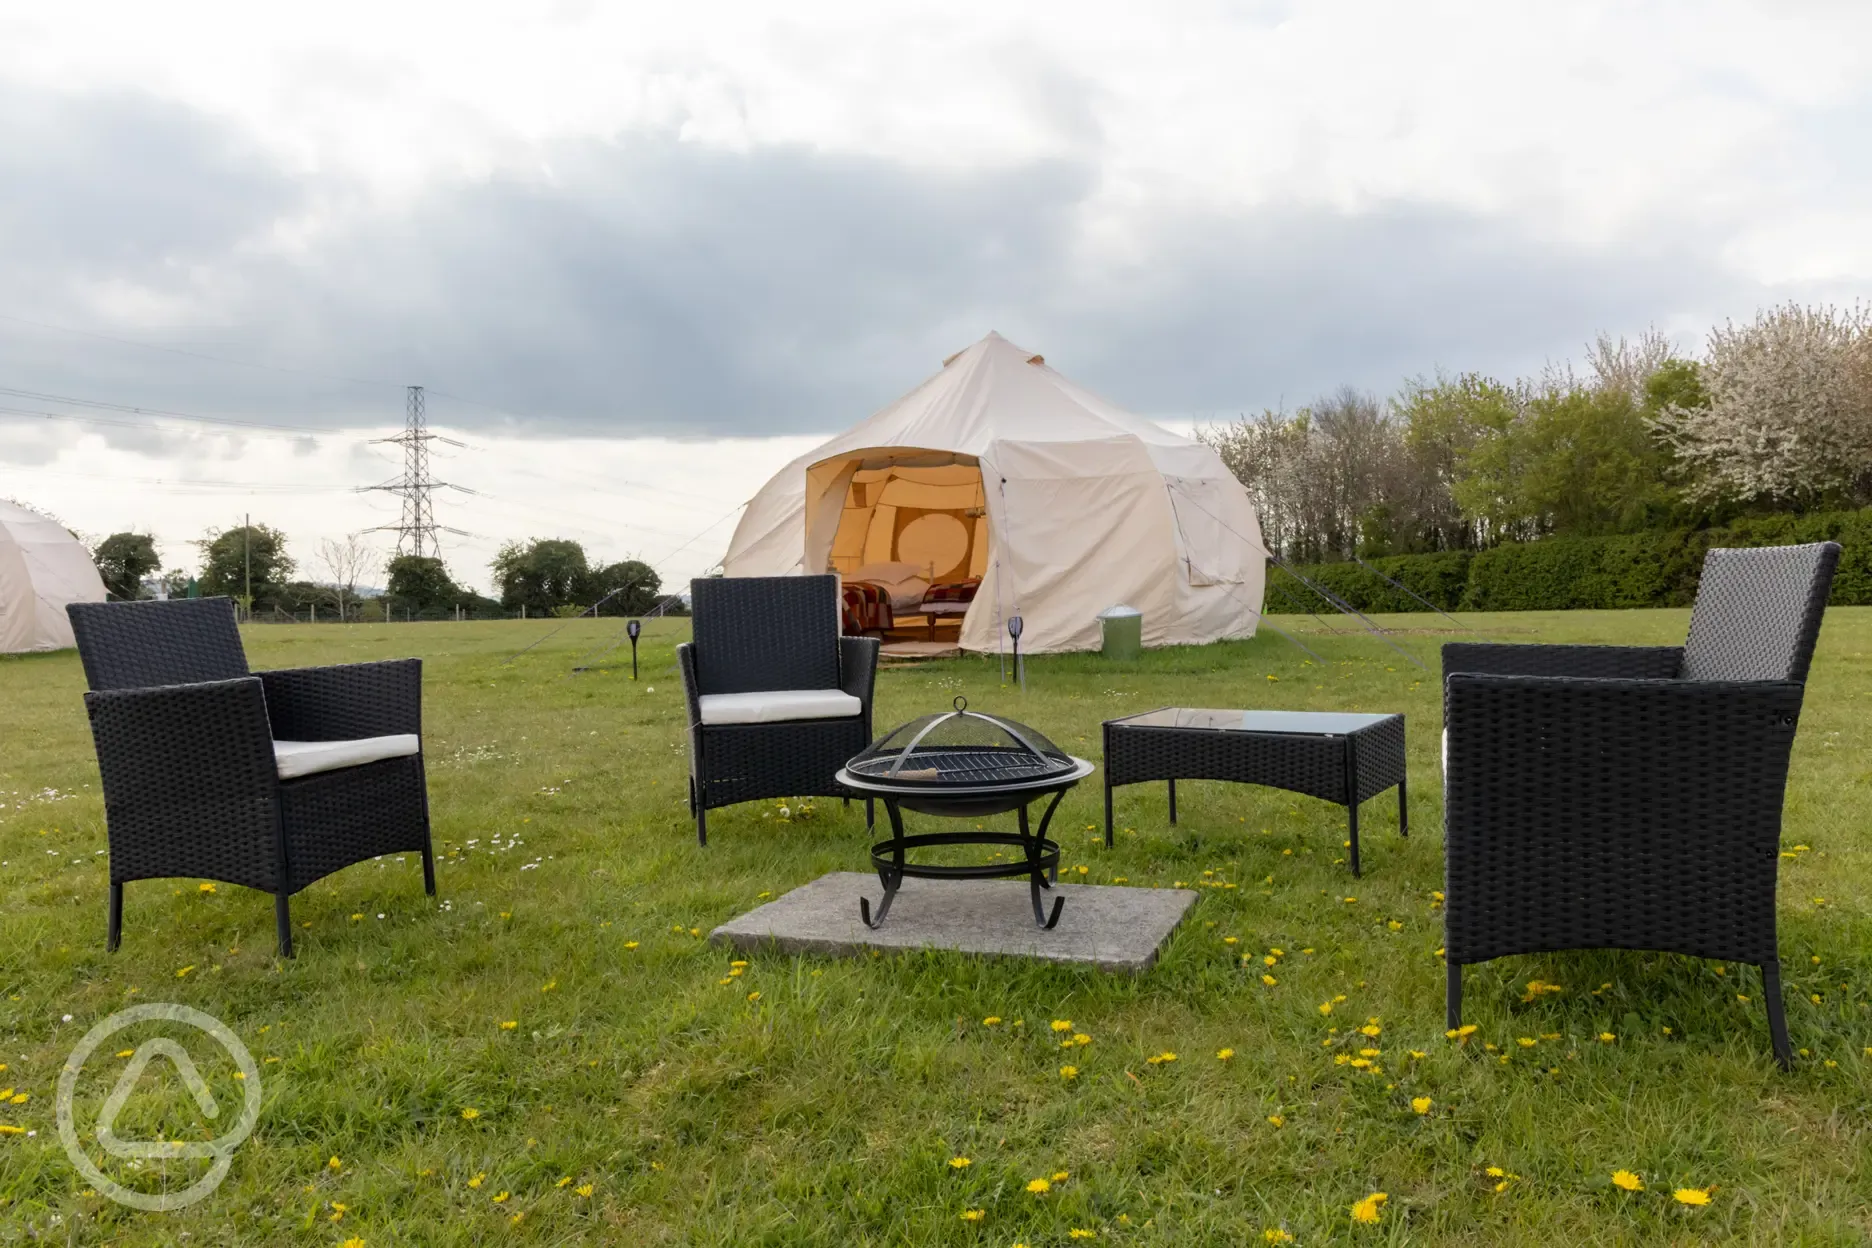 Brazier and seating area with Luna Tent